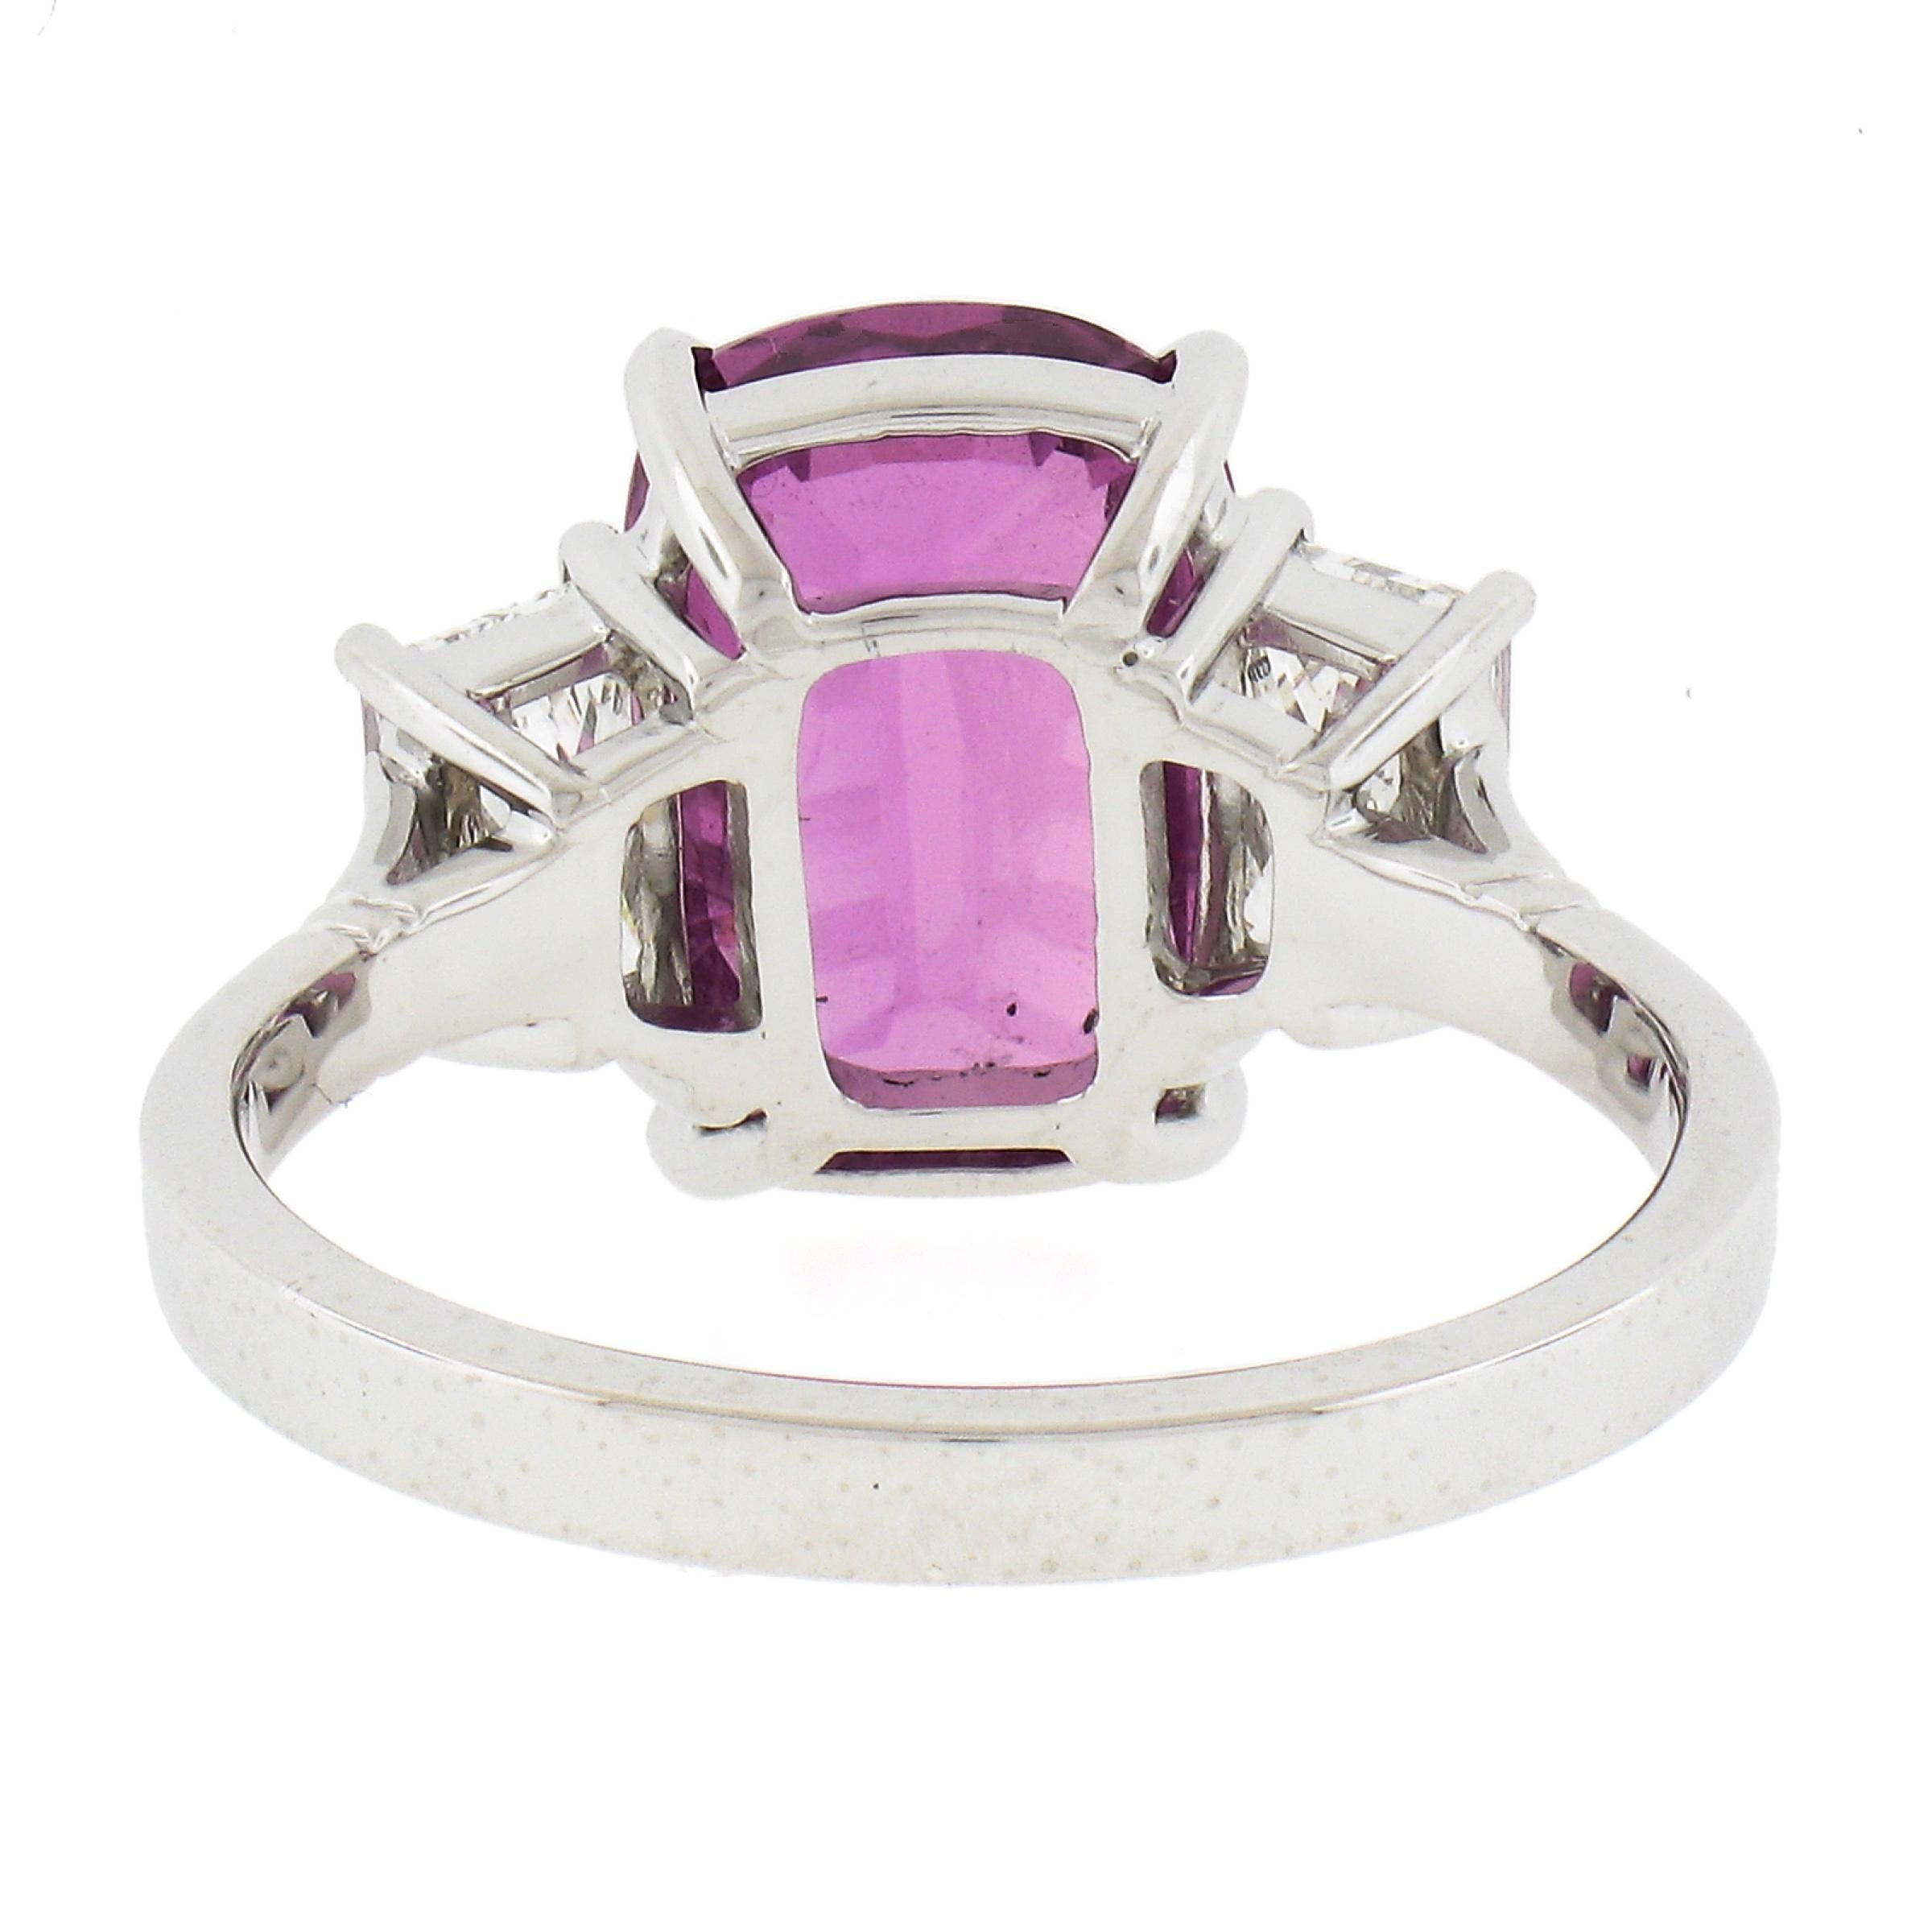 New Platinum 6.13ctw AGL Cushion Pink Sapphire & Long Trapezoid Diamond Ring For Sale 1